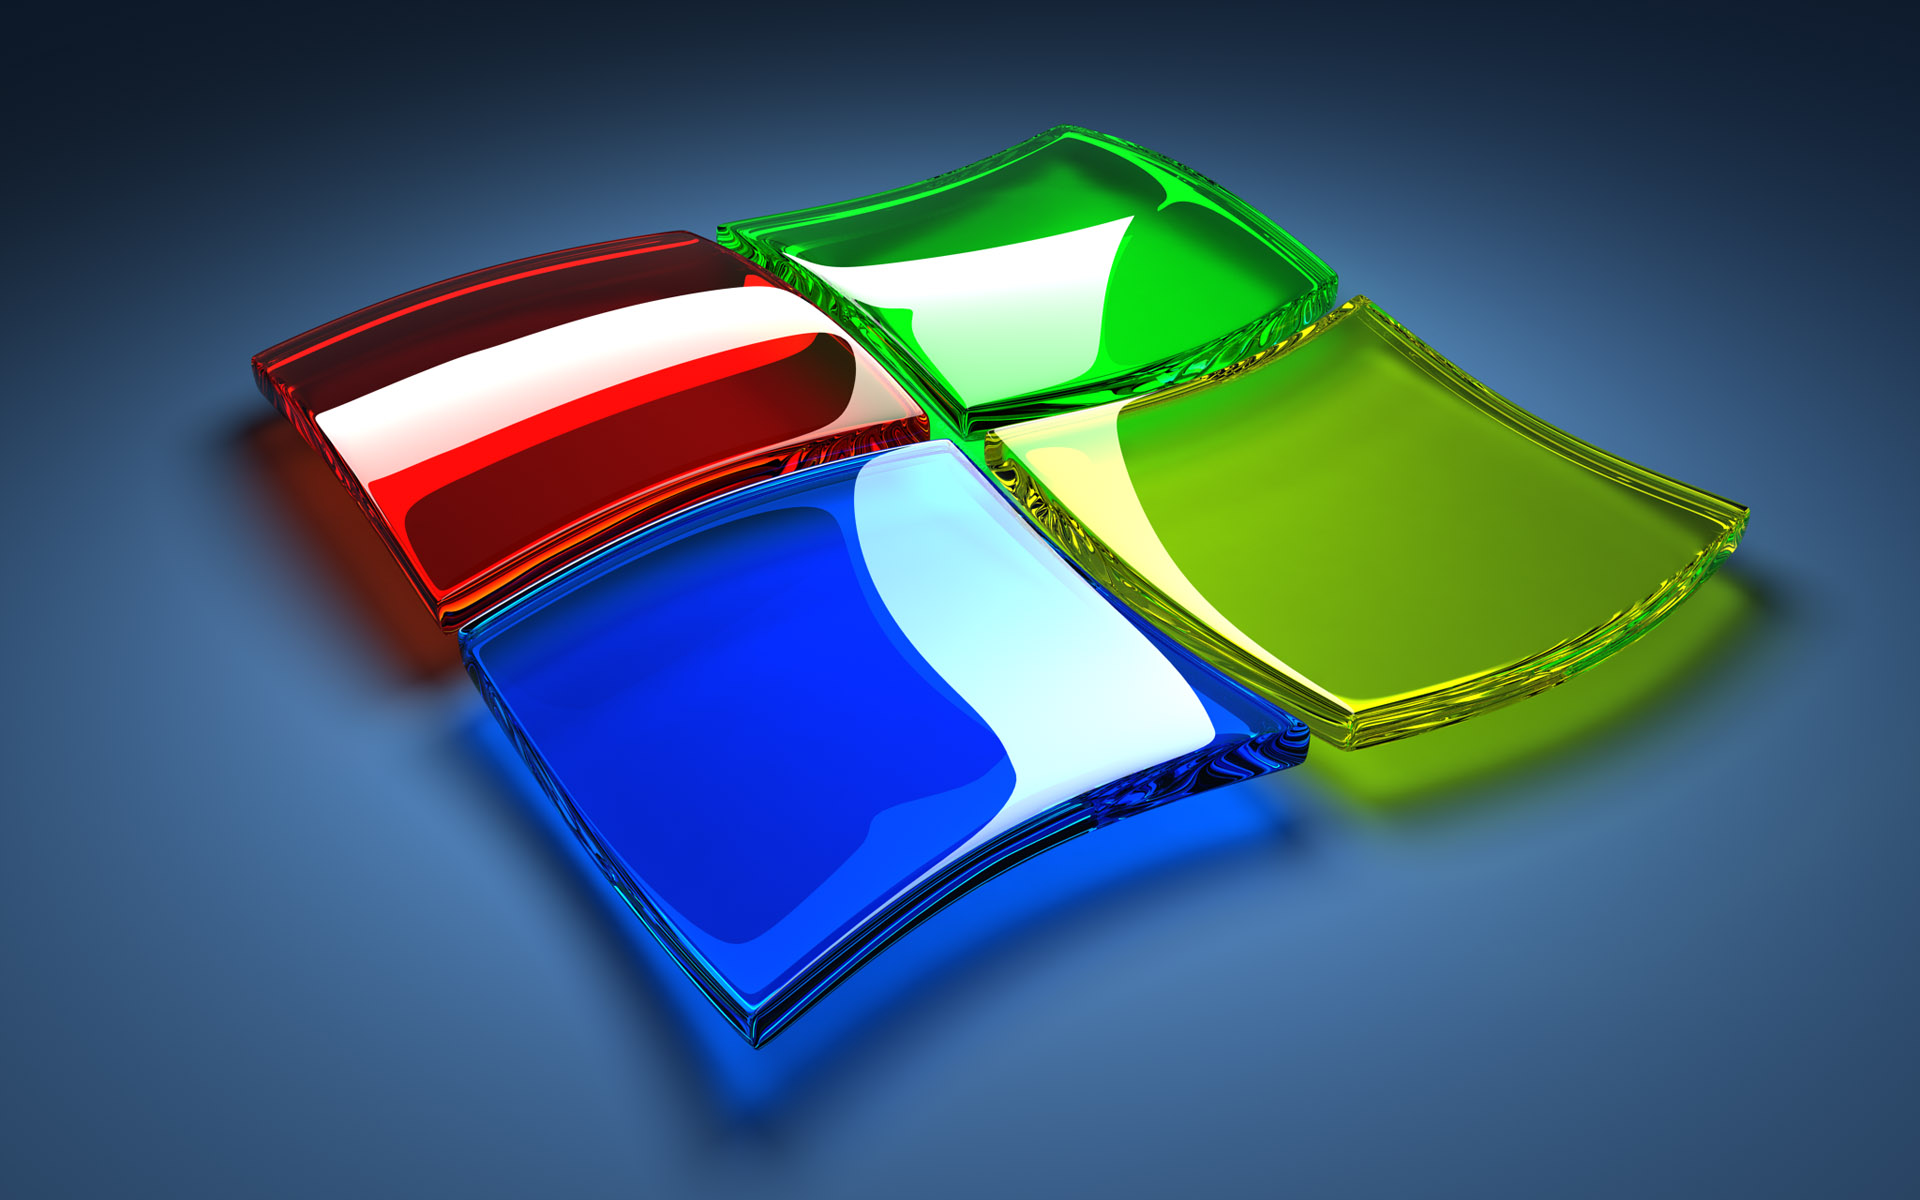  Glass Jello Windows 7 backgrounds hd Wallpaper and make this wallpaper